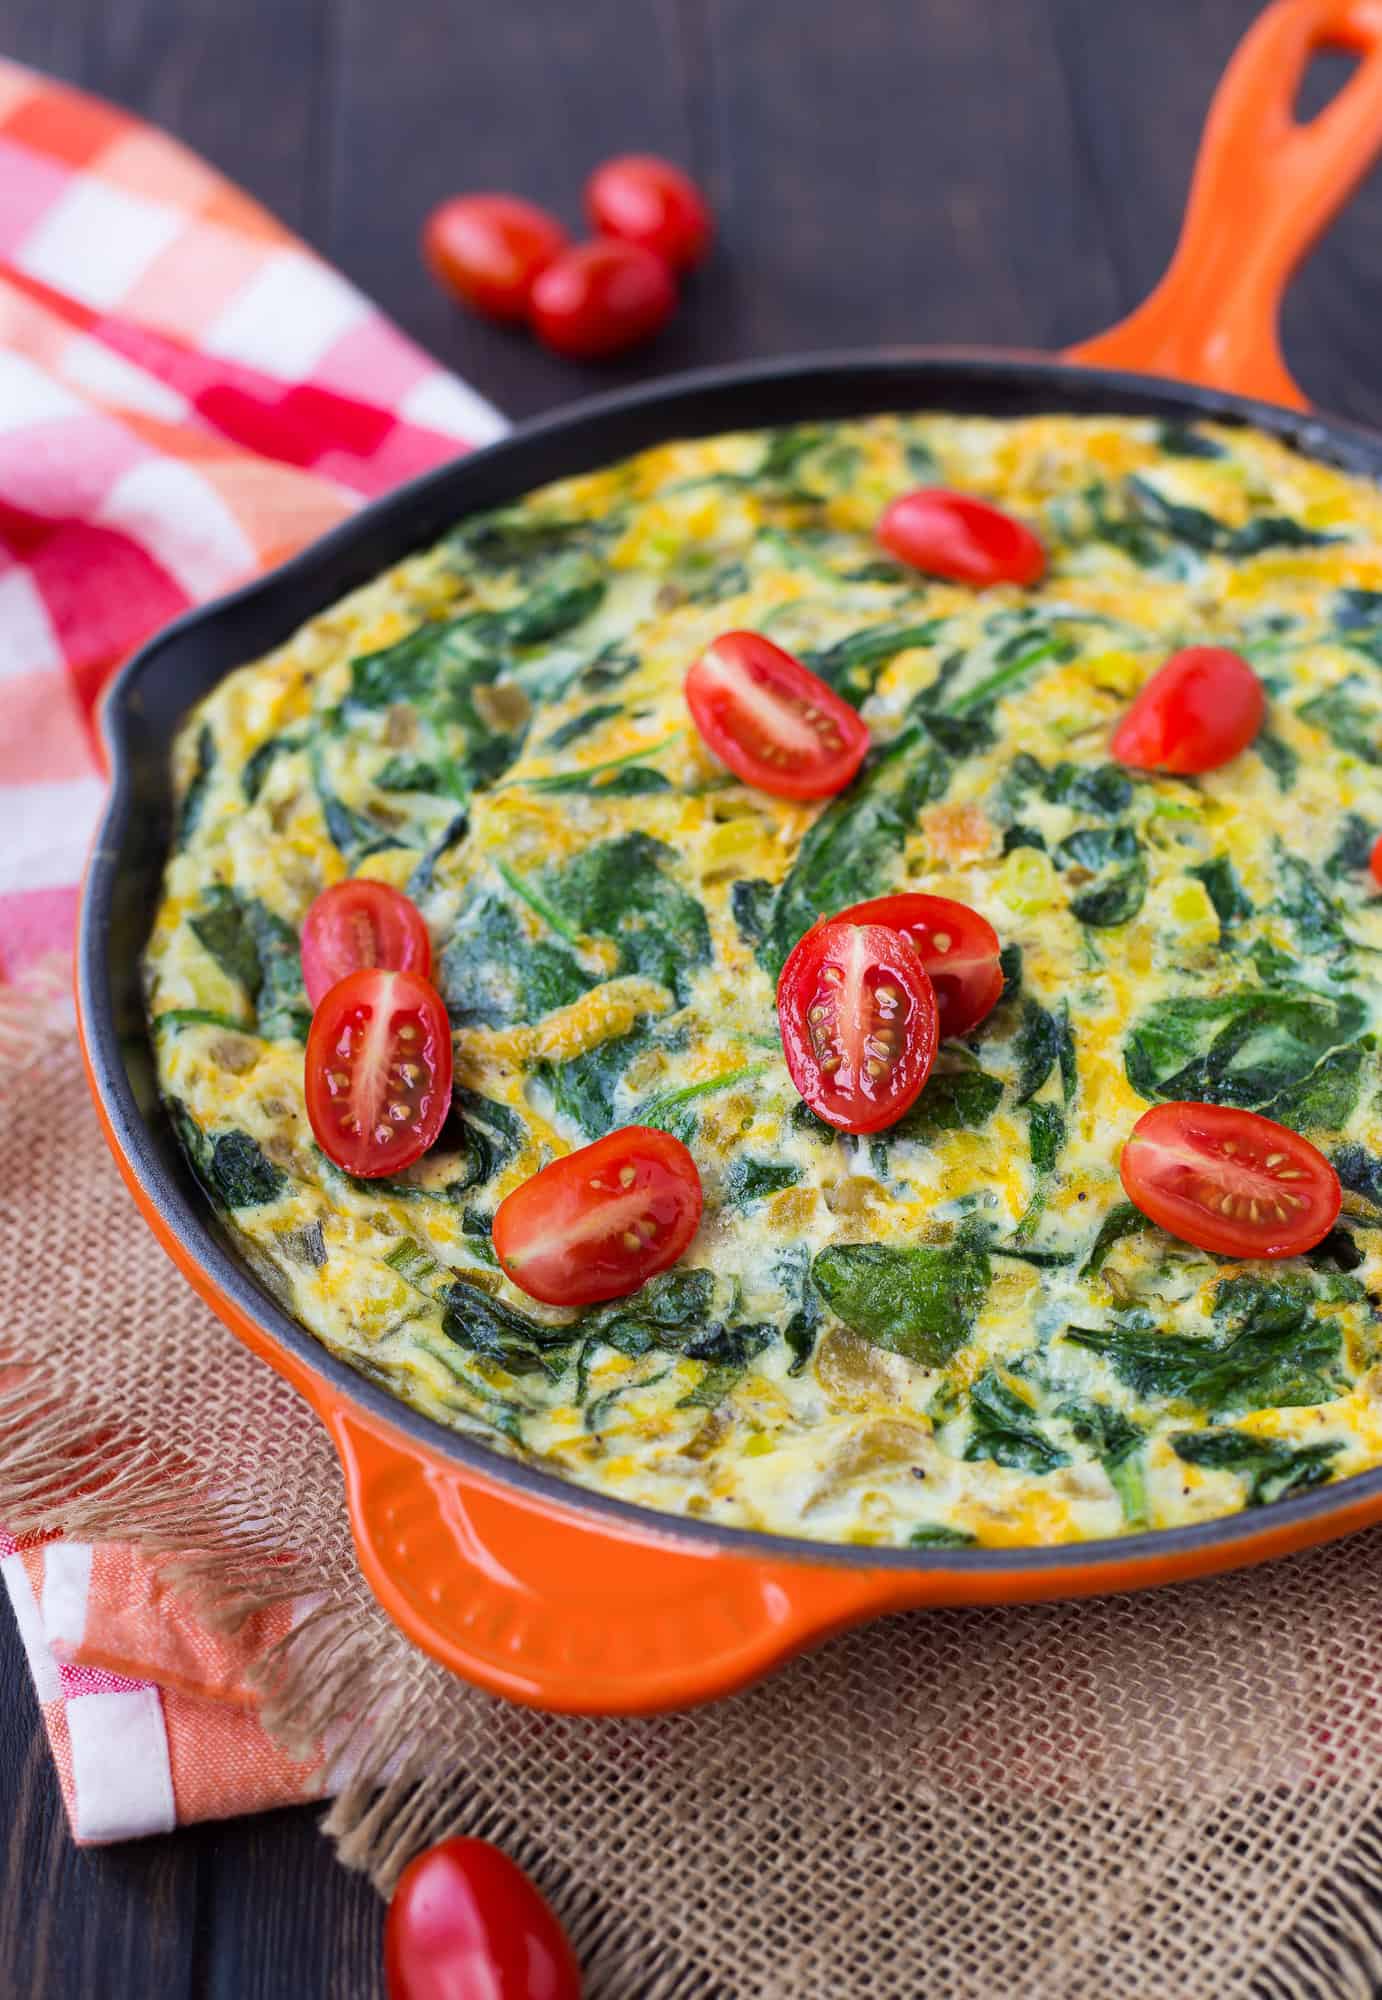 Green chile and spinach frittata in orange pan.